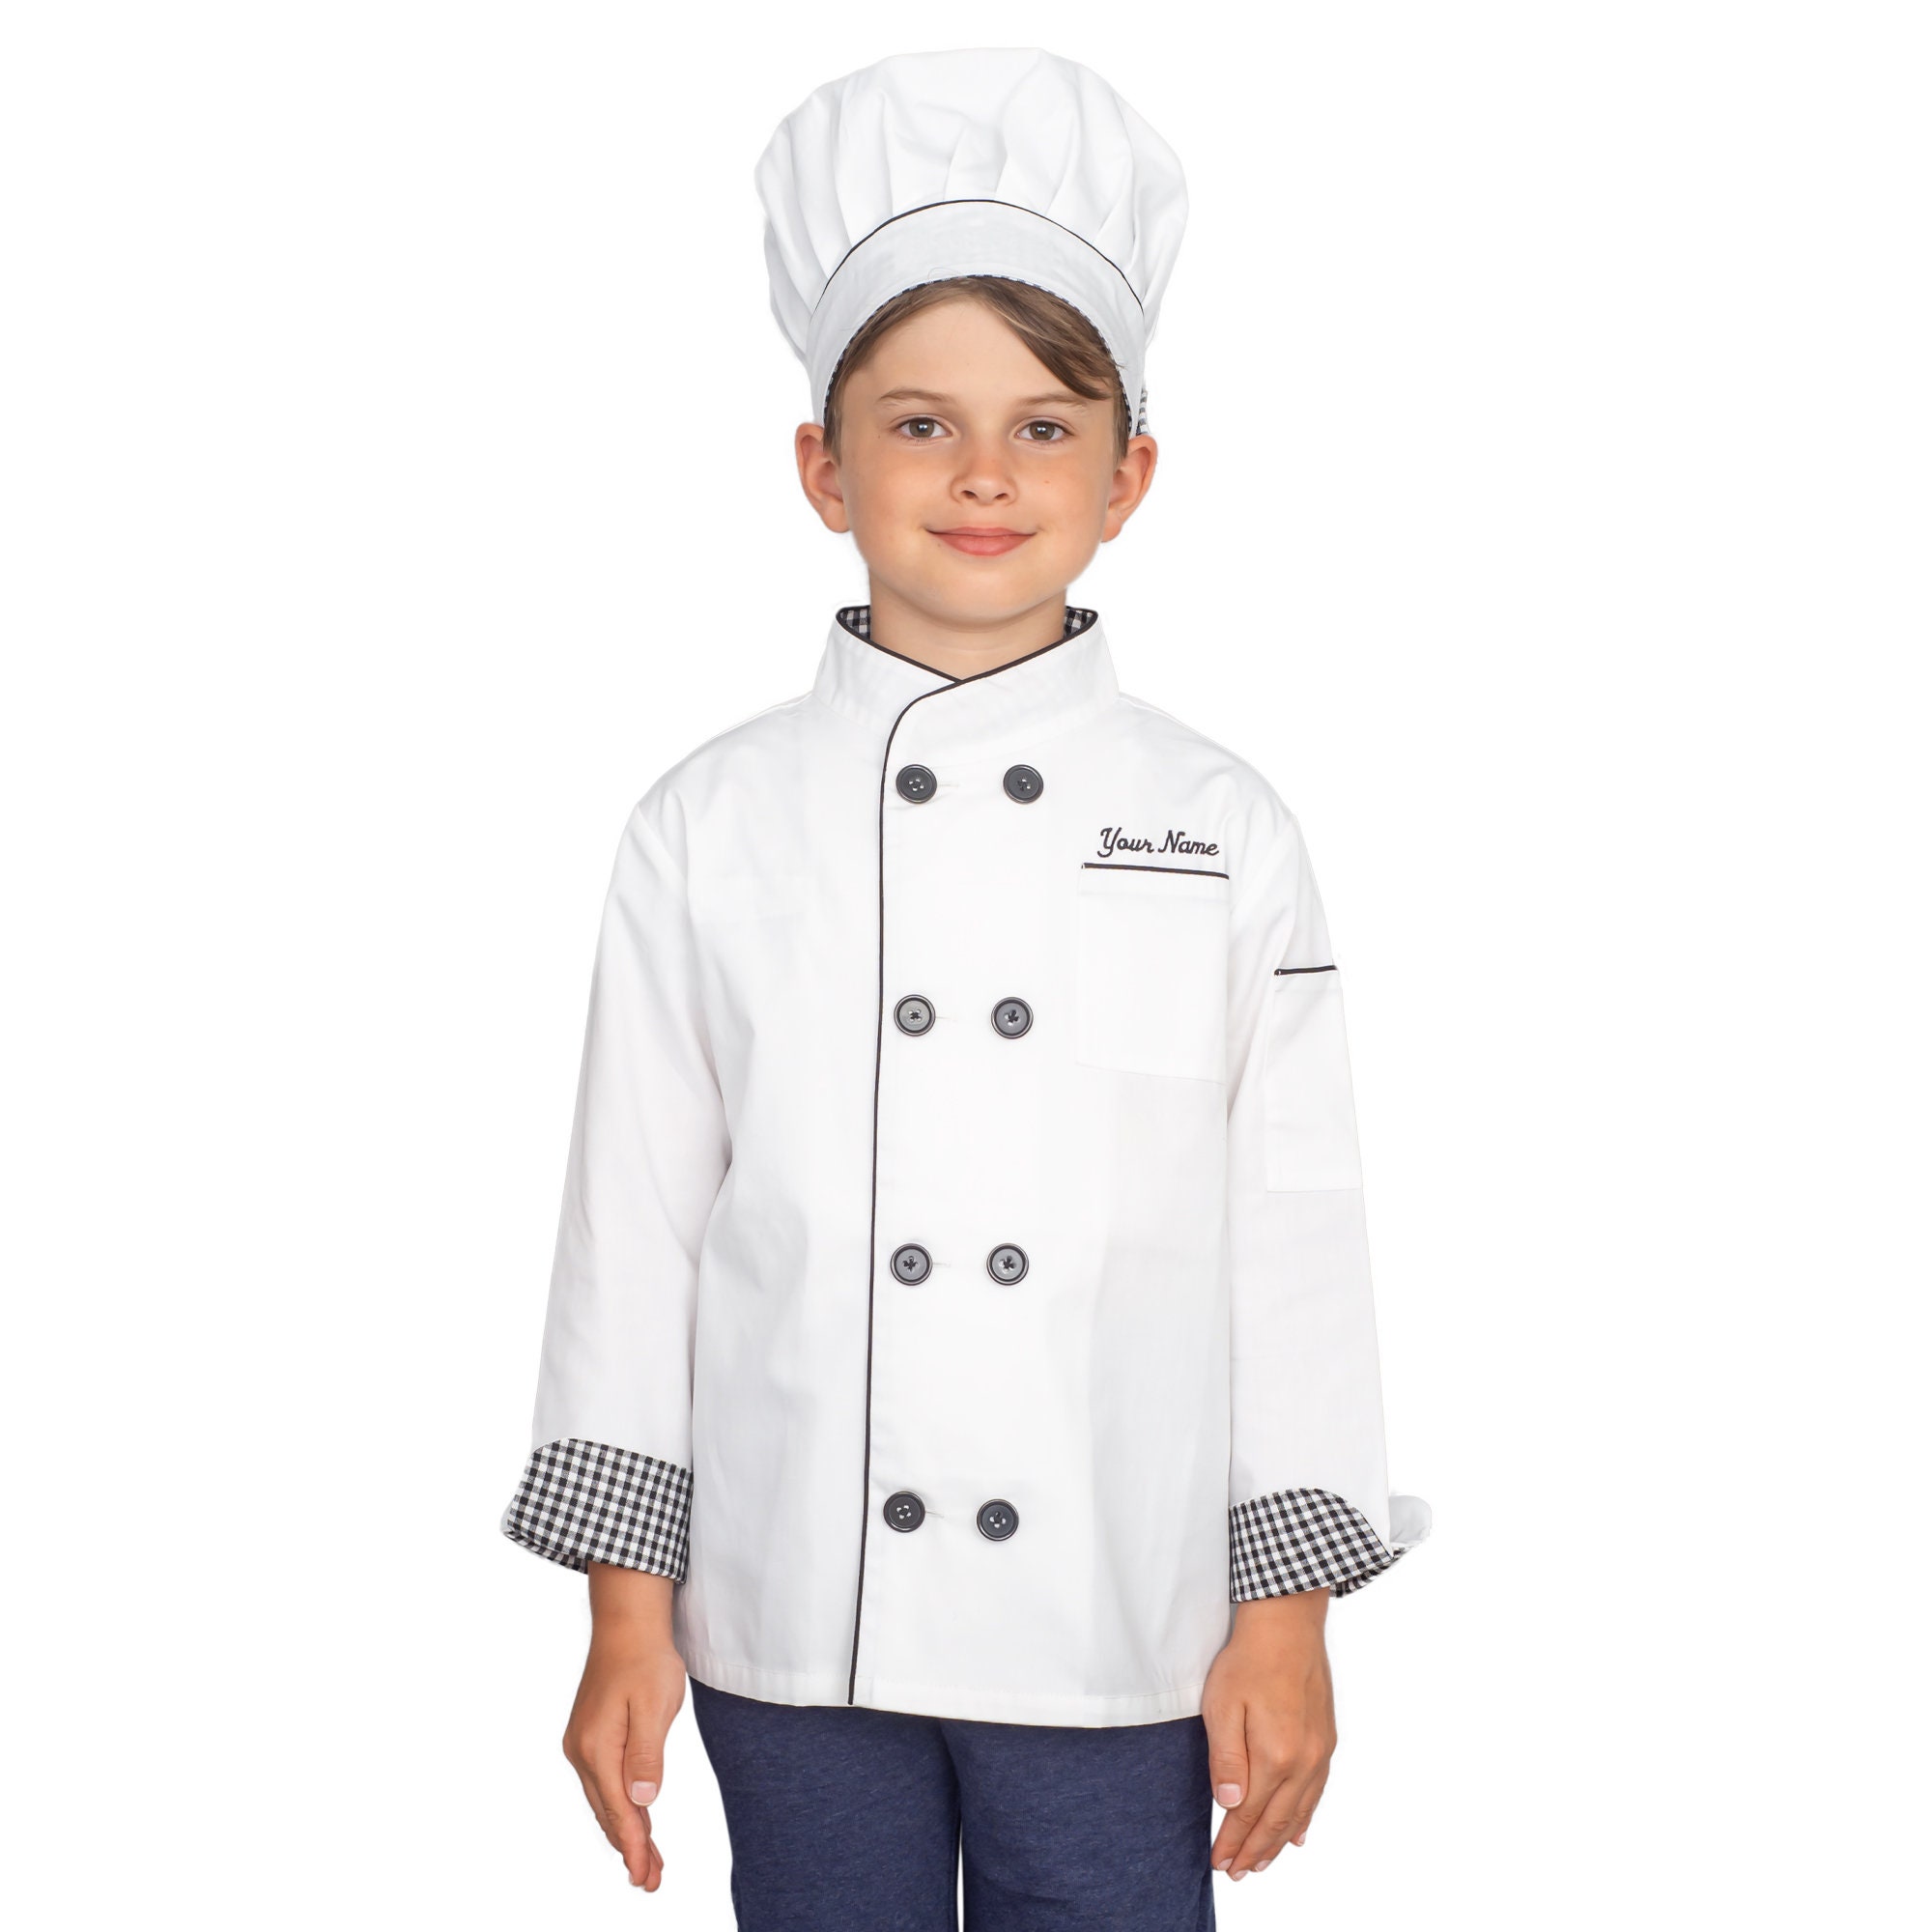 Alvivi Kids Children Chef Bakers Cook Cosplay Role Play Outfit Dress up Short Sleeve Jacket with Apron Hat 